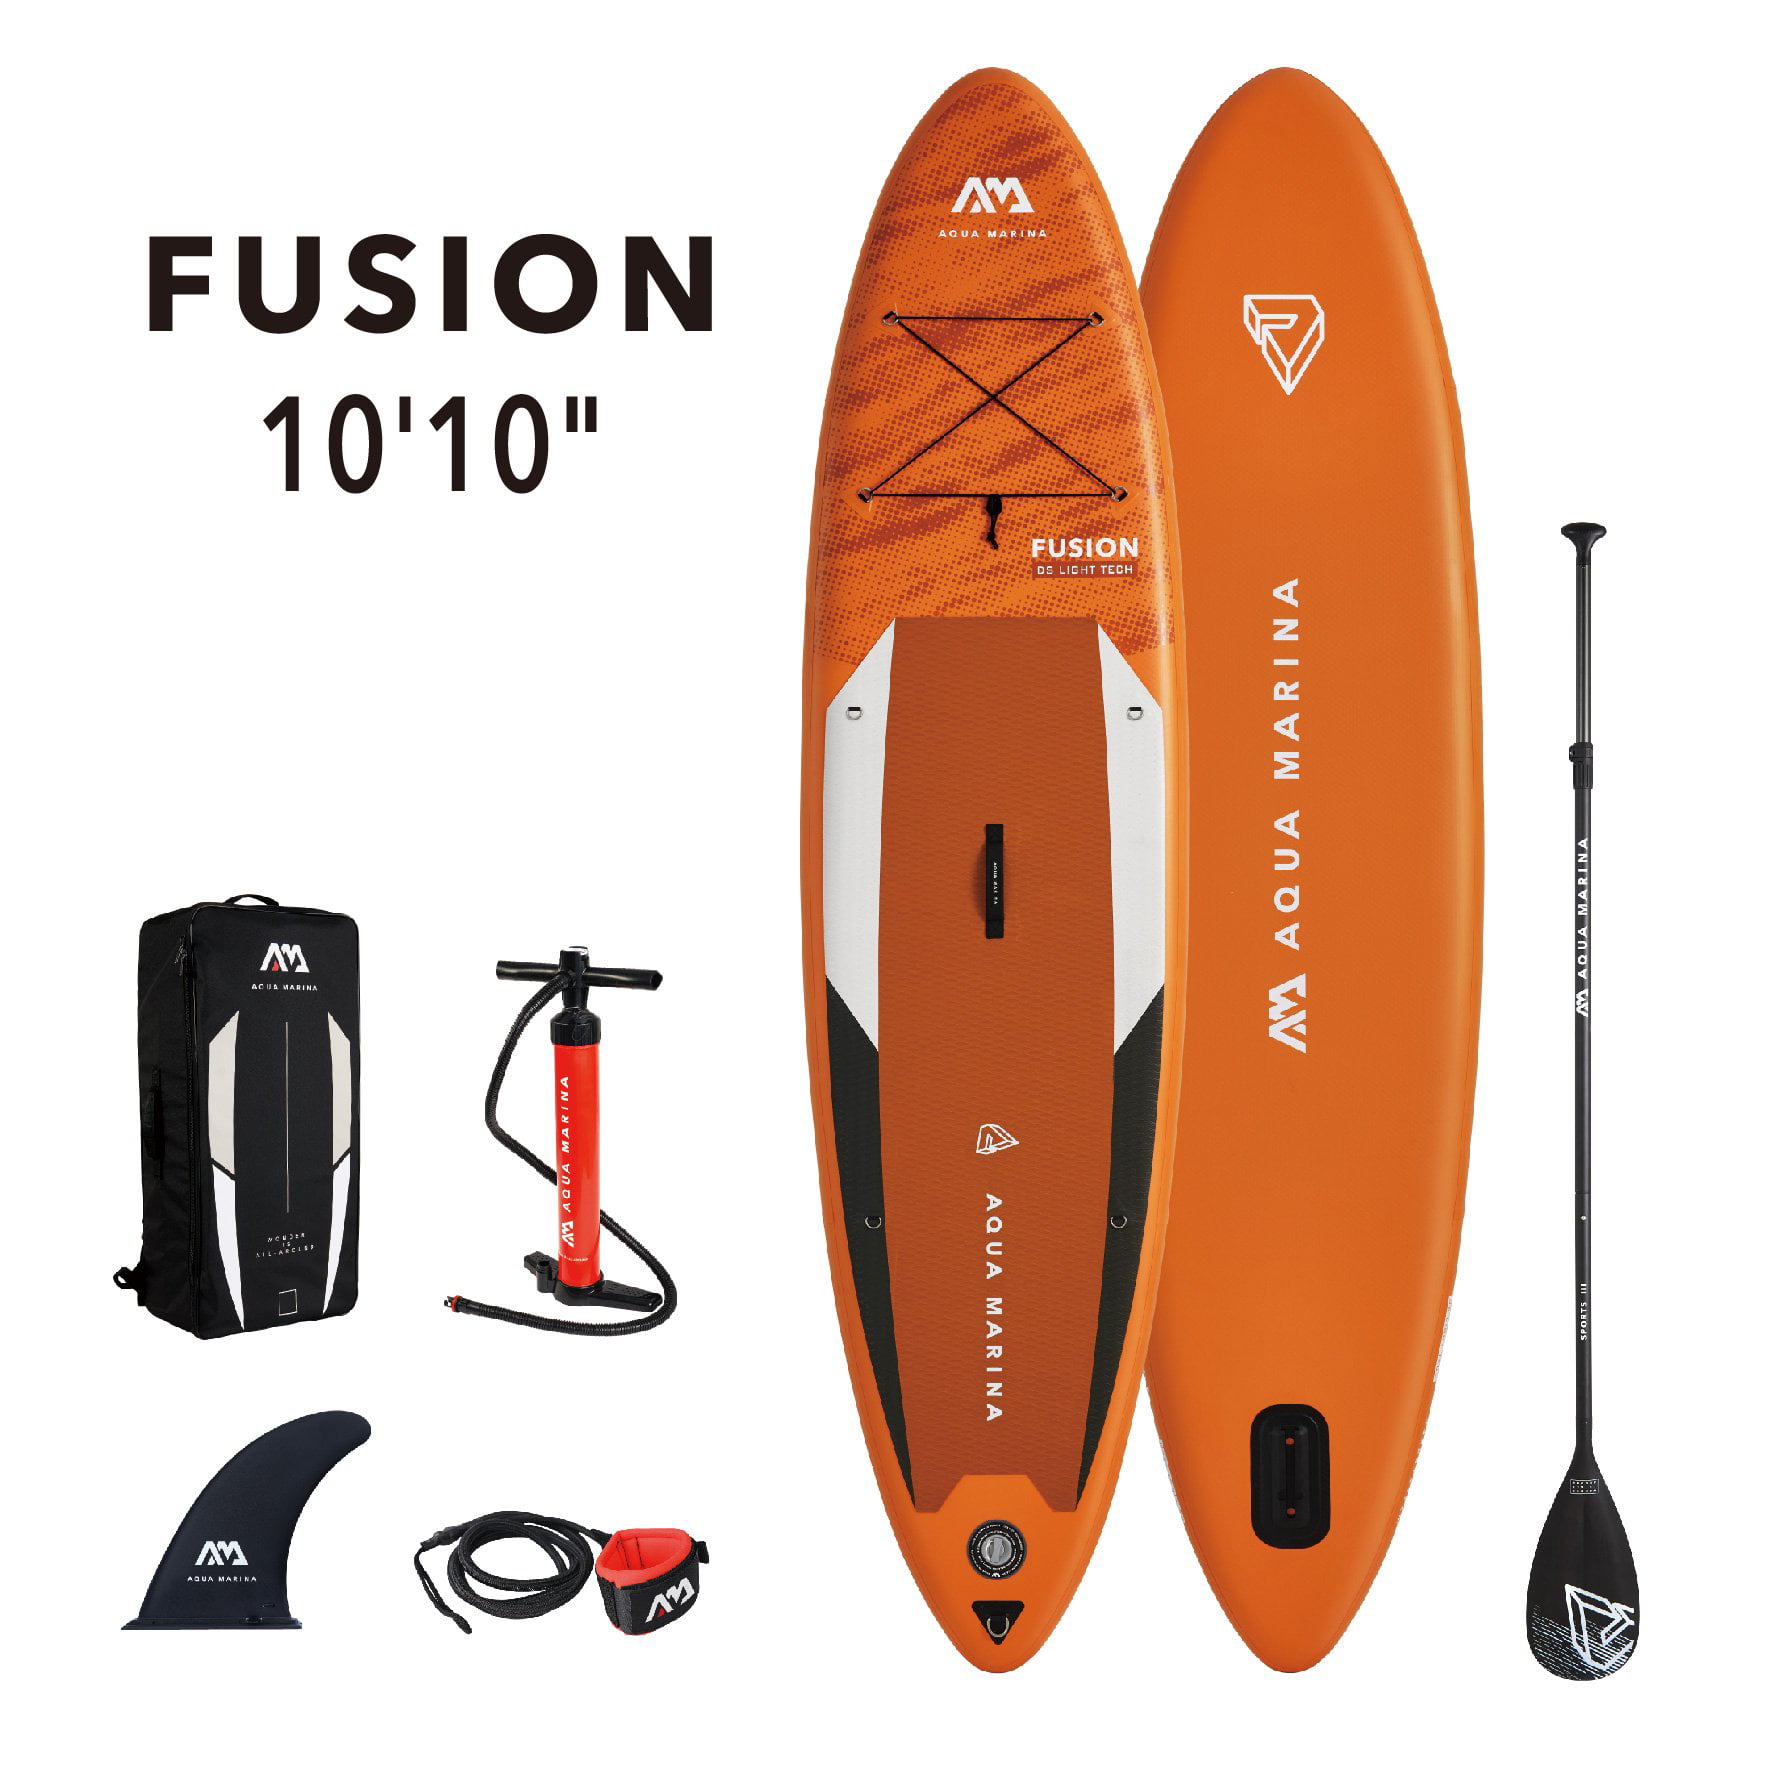 Harness Pump Paddle, Bag, FUSION Board Paddle Aqua Carry Fin, - - Marina & SUP Package, Stand Inflatable including Up Safety 1010